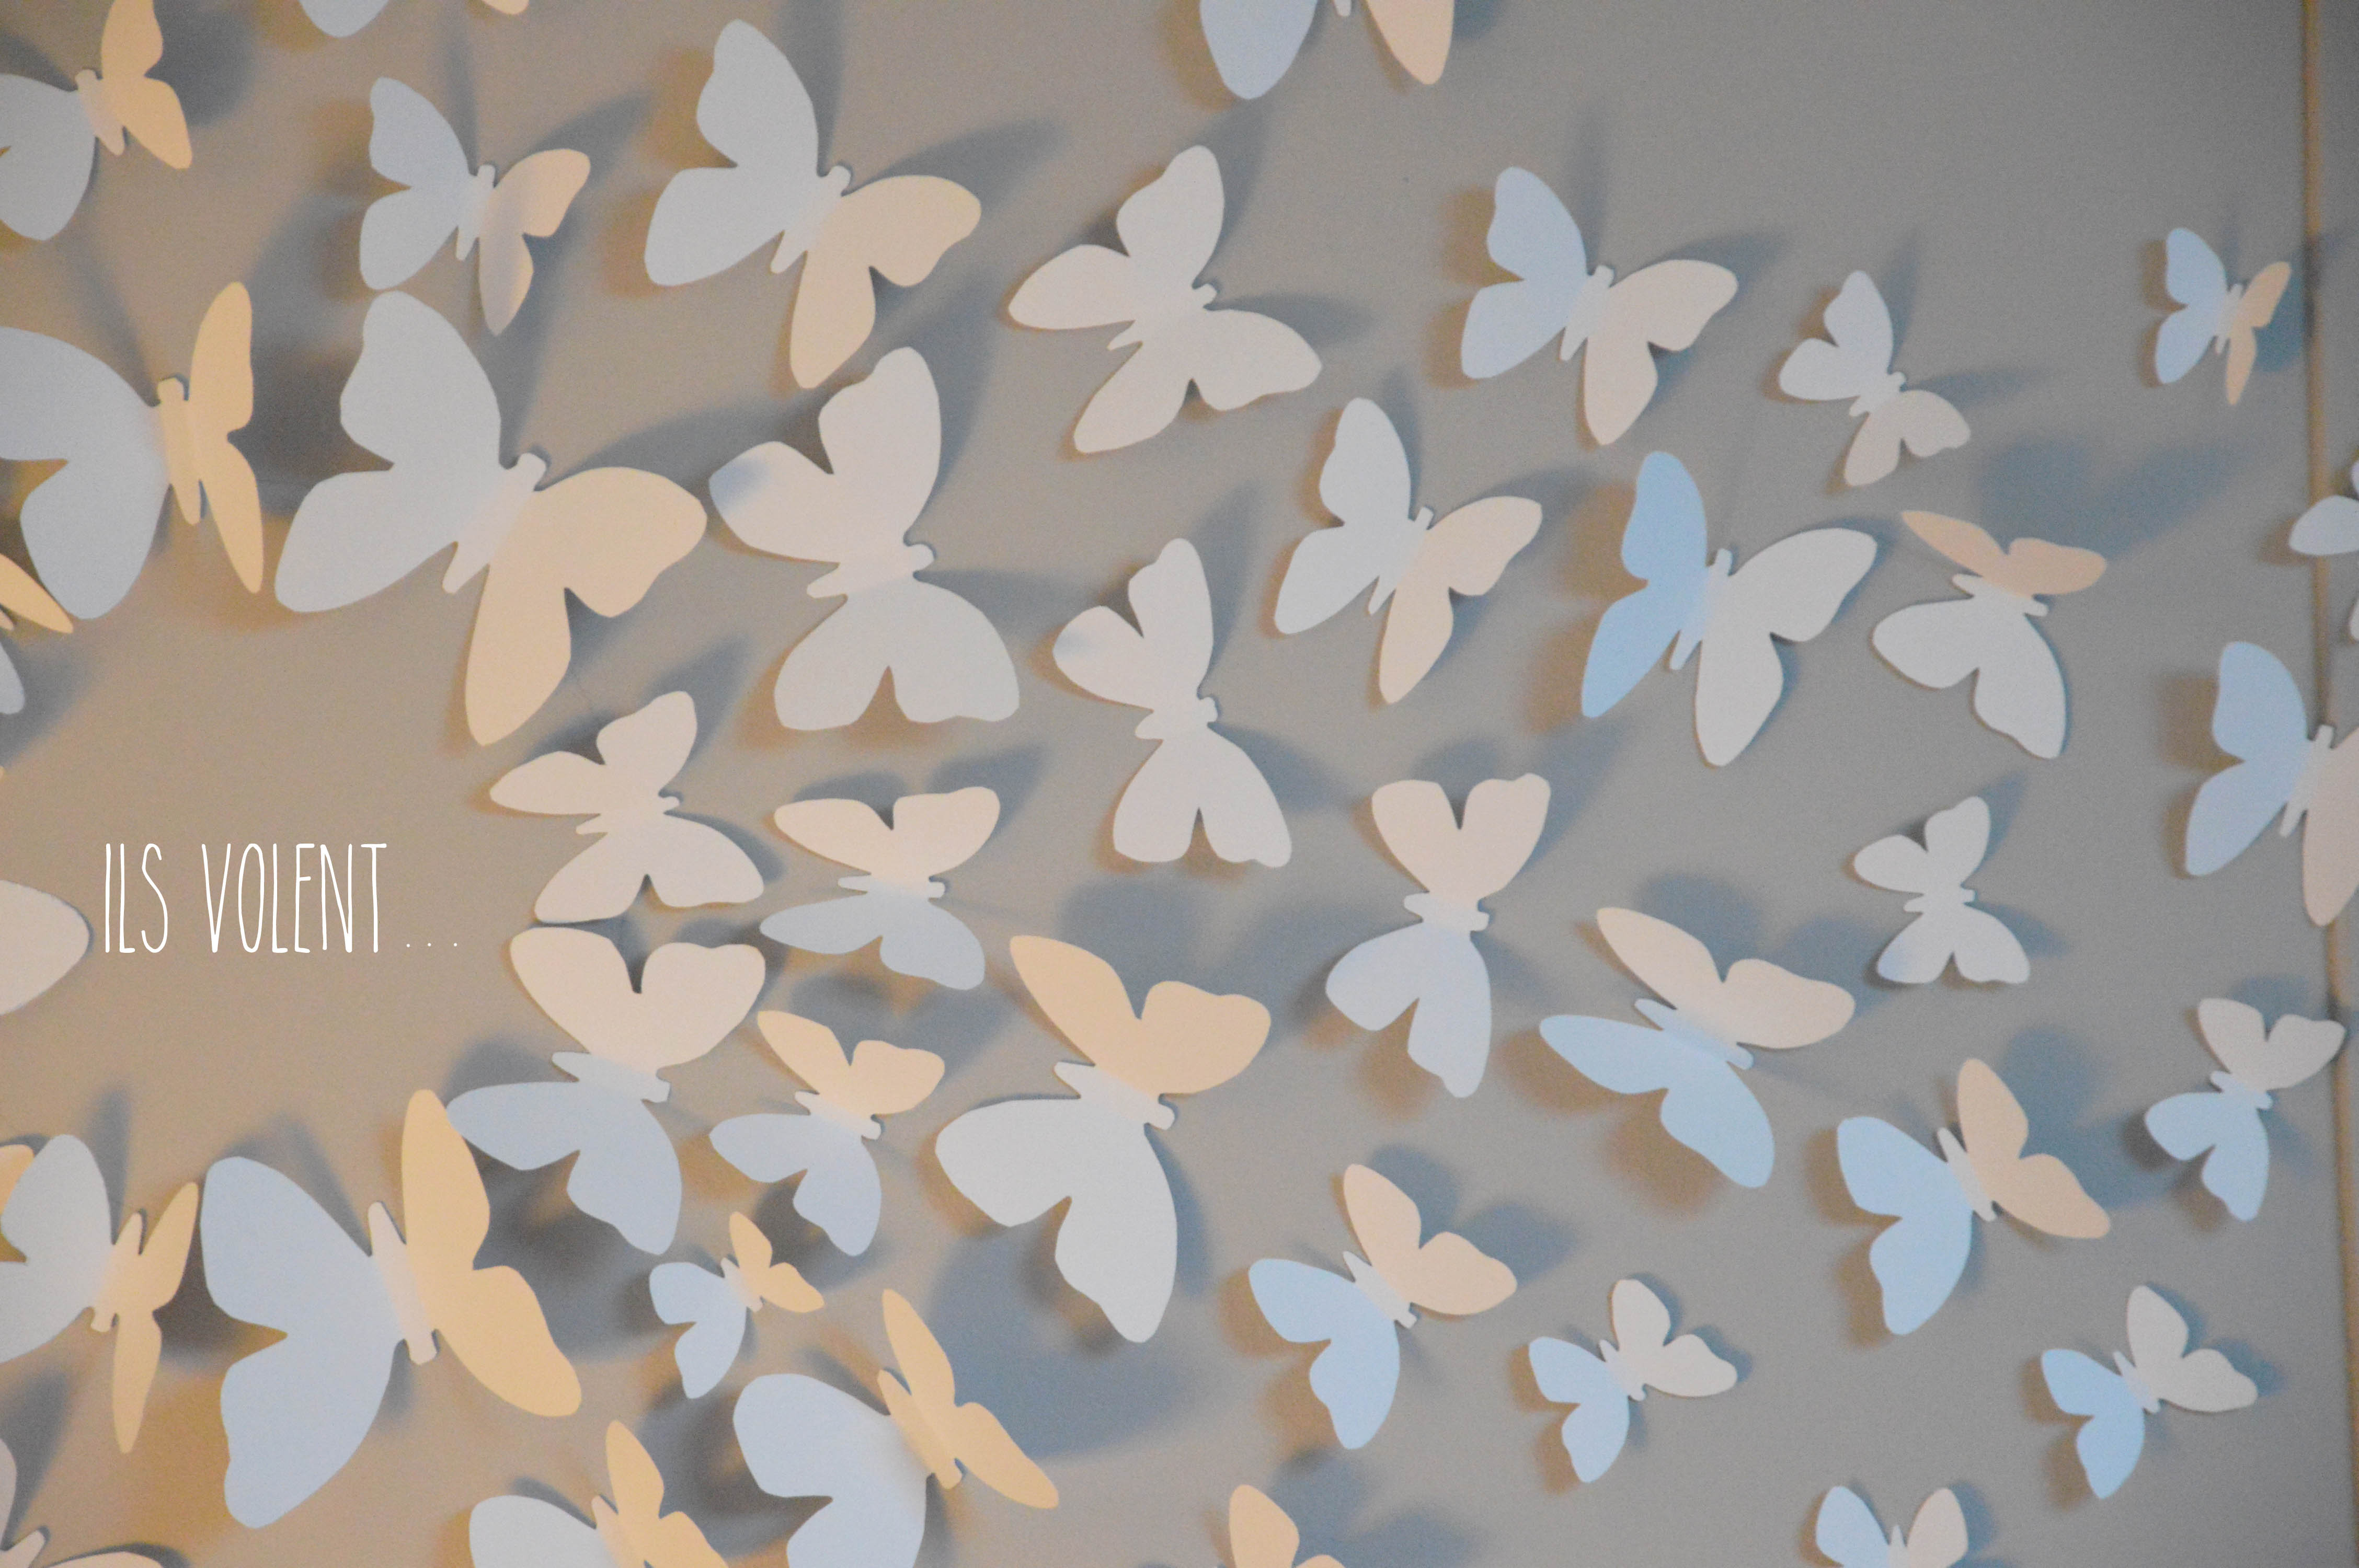 ALITTLEB_BLOG_BEAUTE_LIFESTYLE_DIY_DECO_BUTTERFLY_PROJECT_ETAPES_POSE_ZOOM_PROJET_FIN